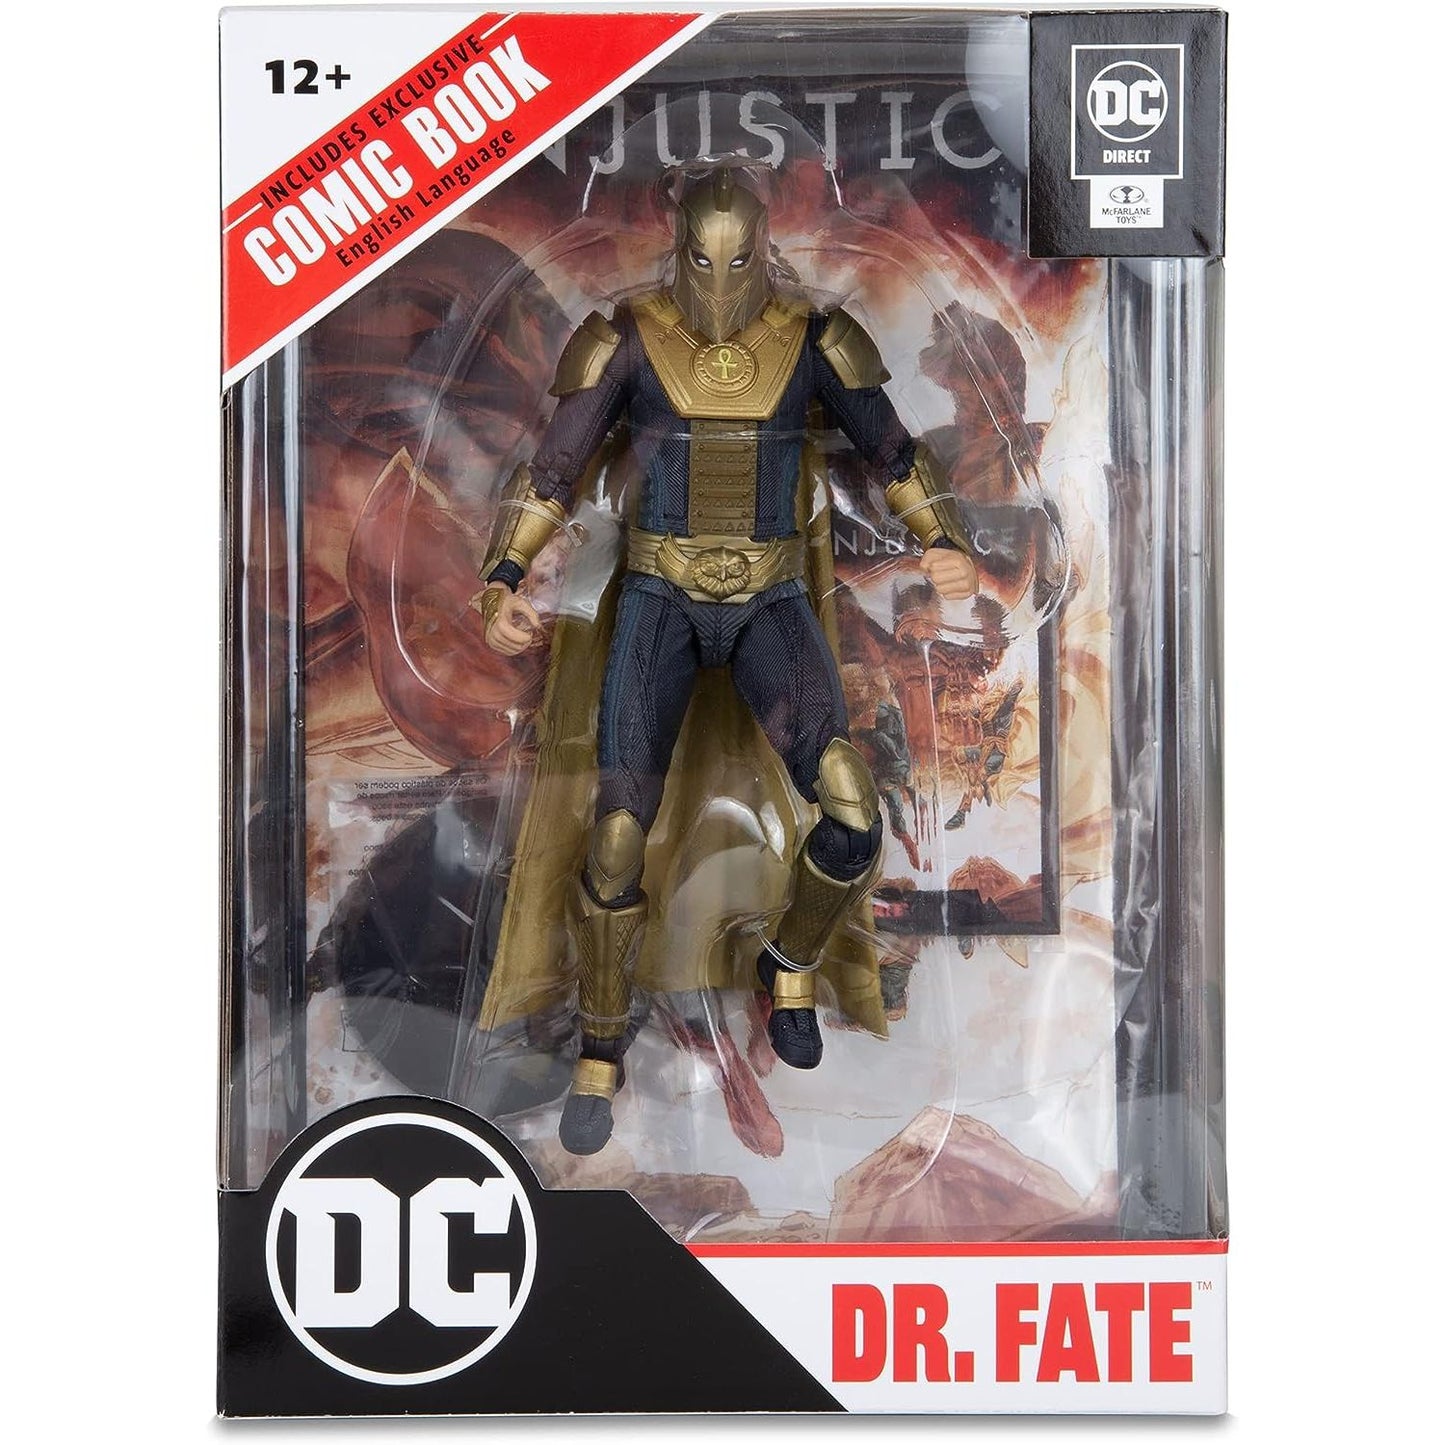 Injustice 2 - DR. Fate Action Figure Toy in a package front view - Heretoserveyou